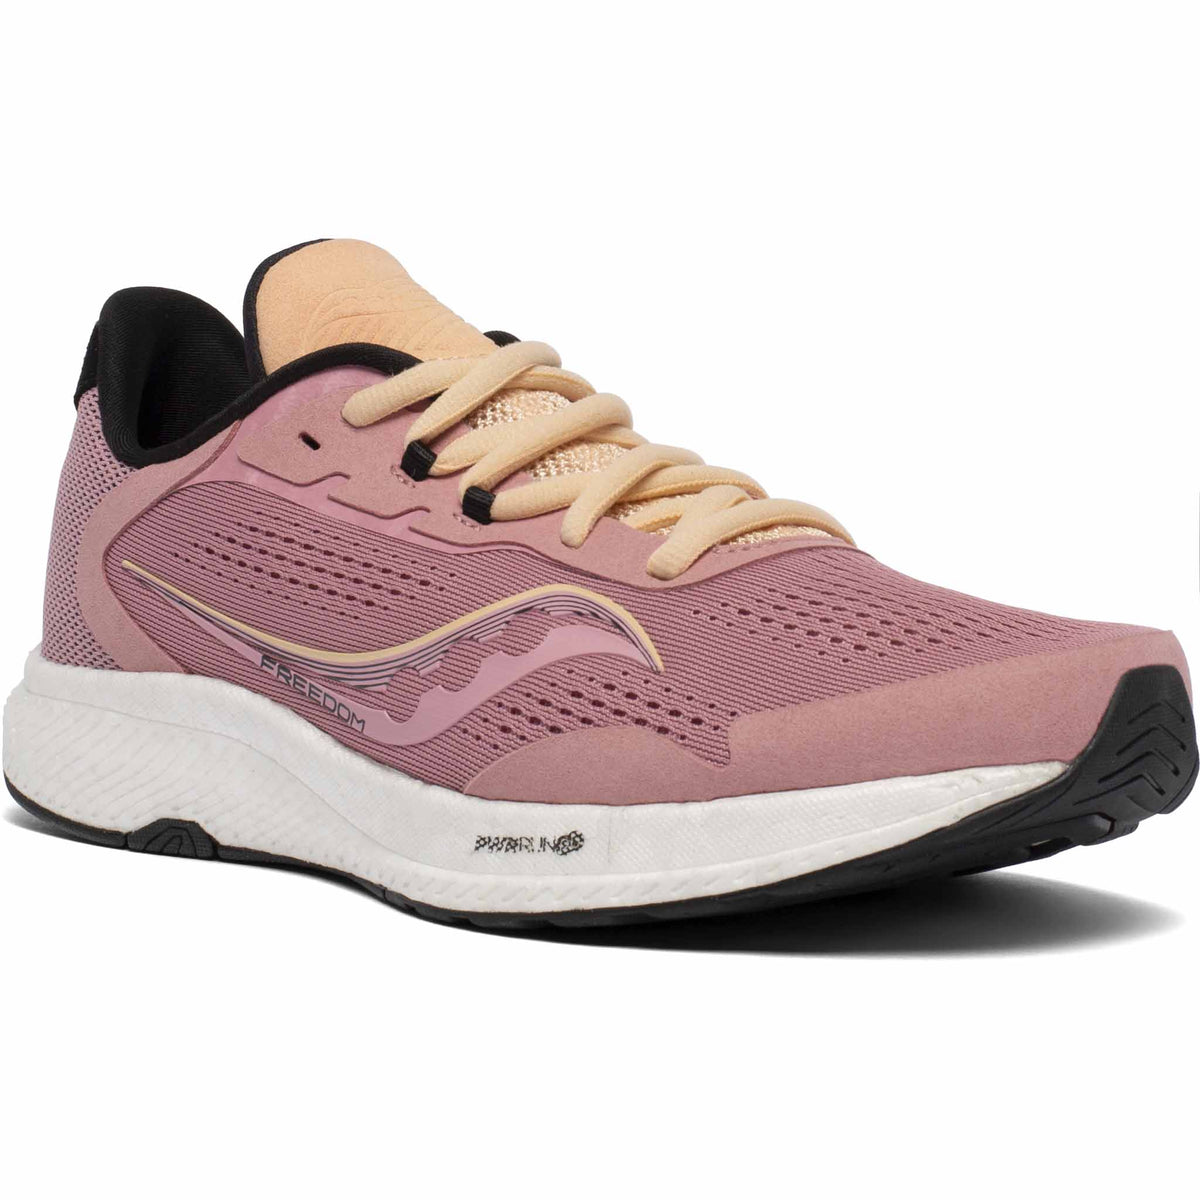 Saucony Freedom 4 Chaussures de course à pied femme Rosewater Sunset Angle